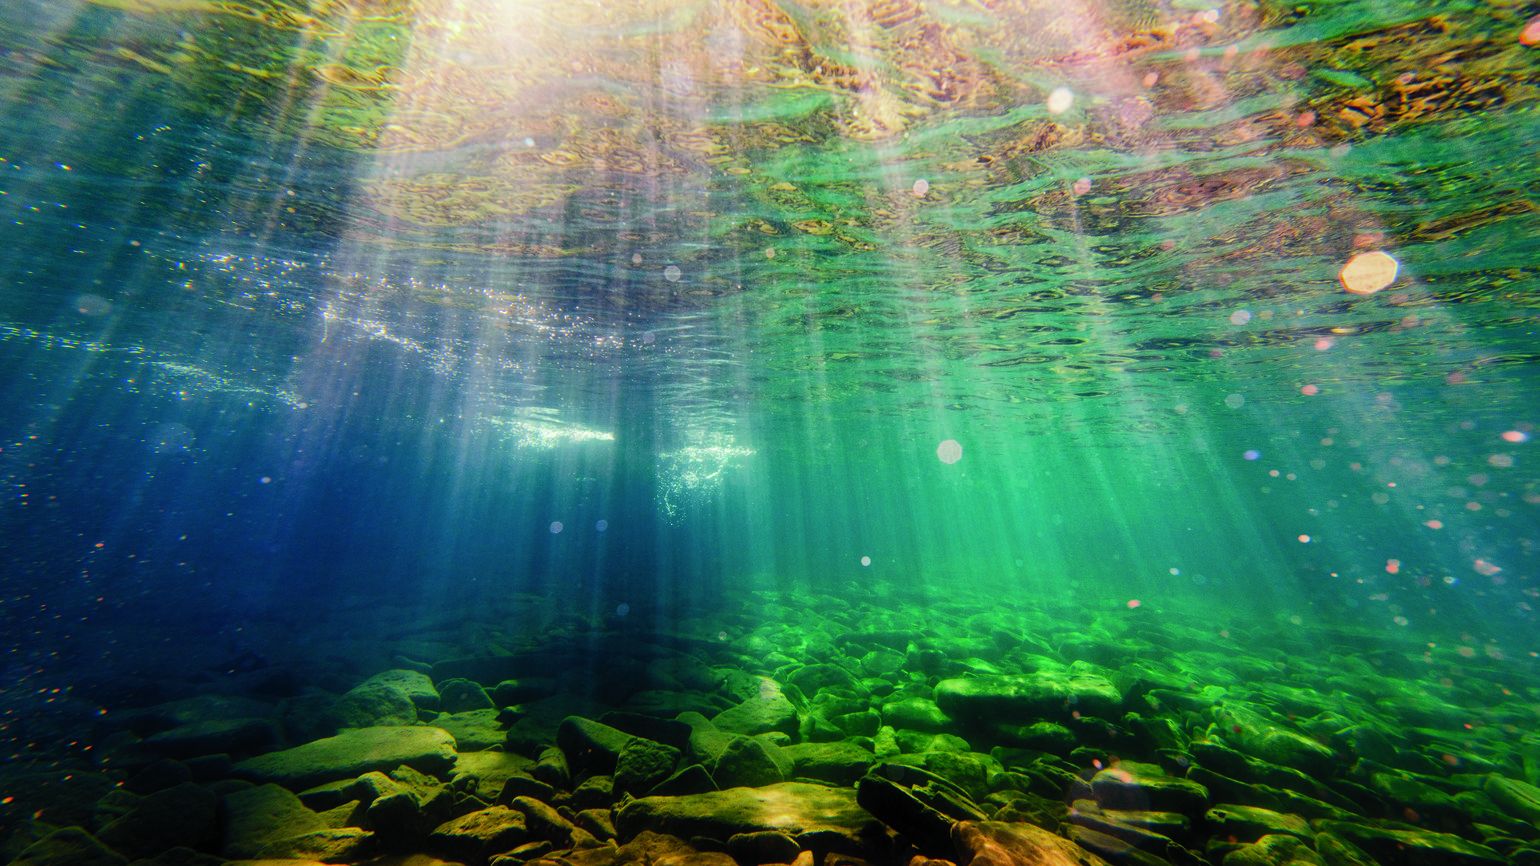 Underwater scene with sunlight doing positive living and an inspirational quote